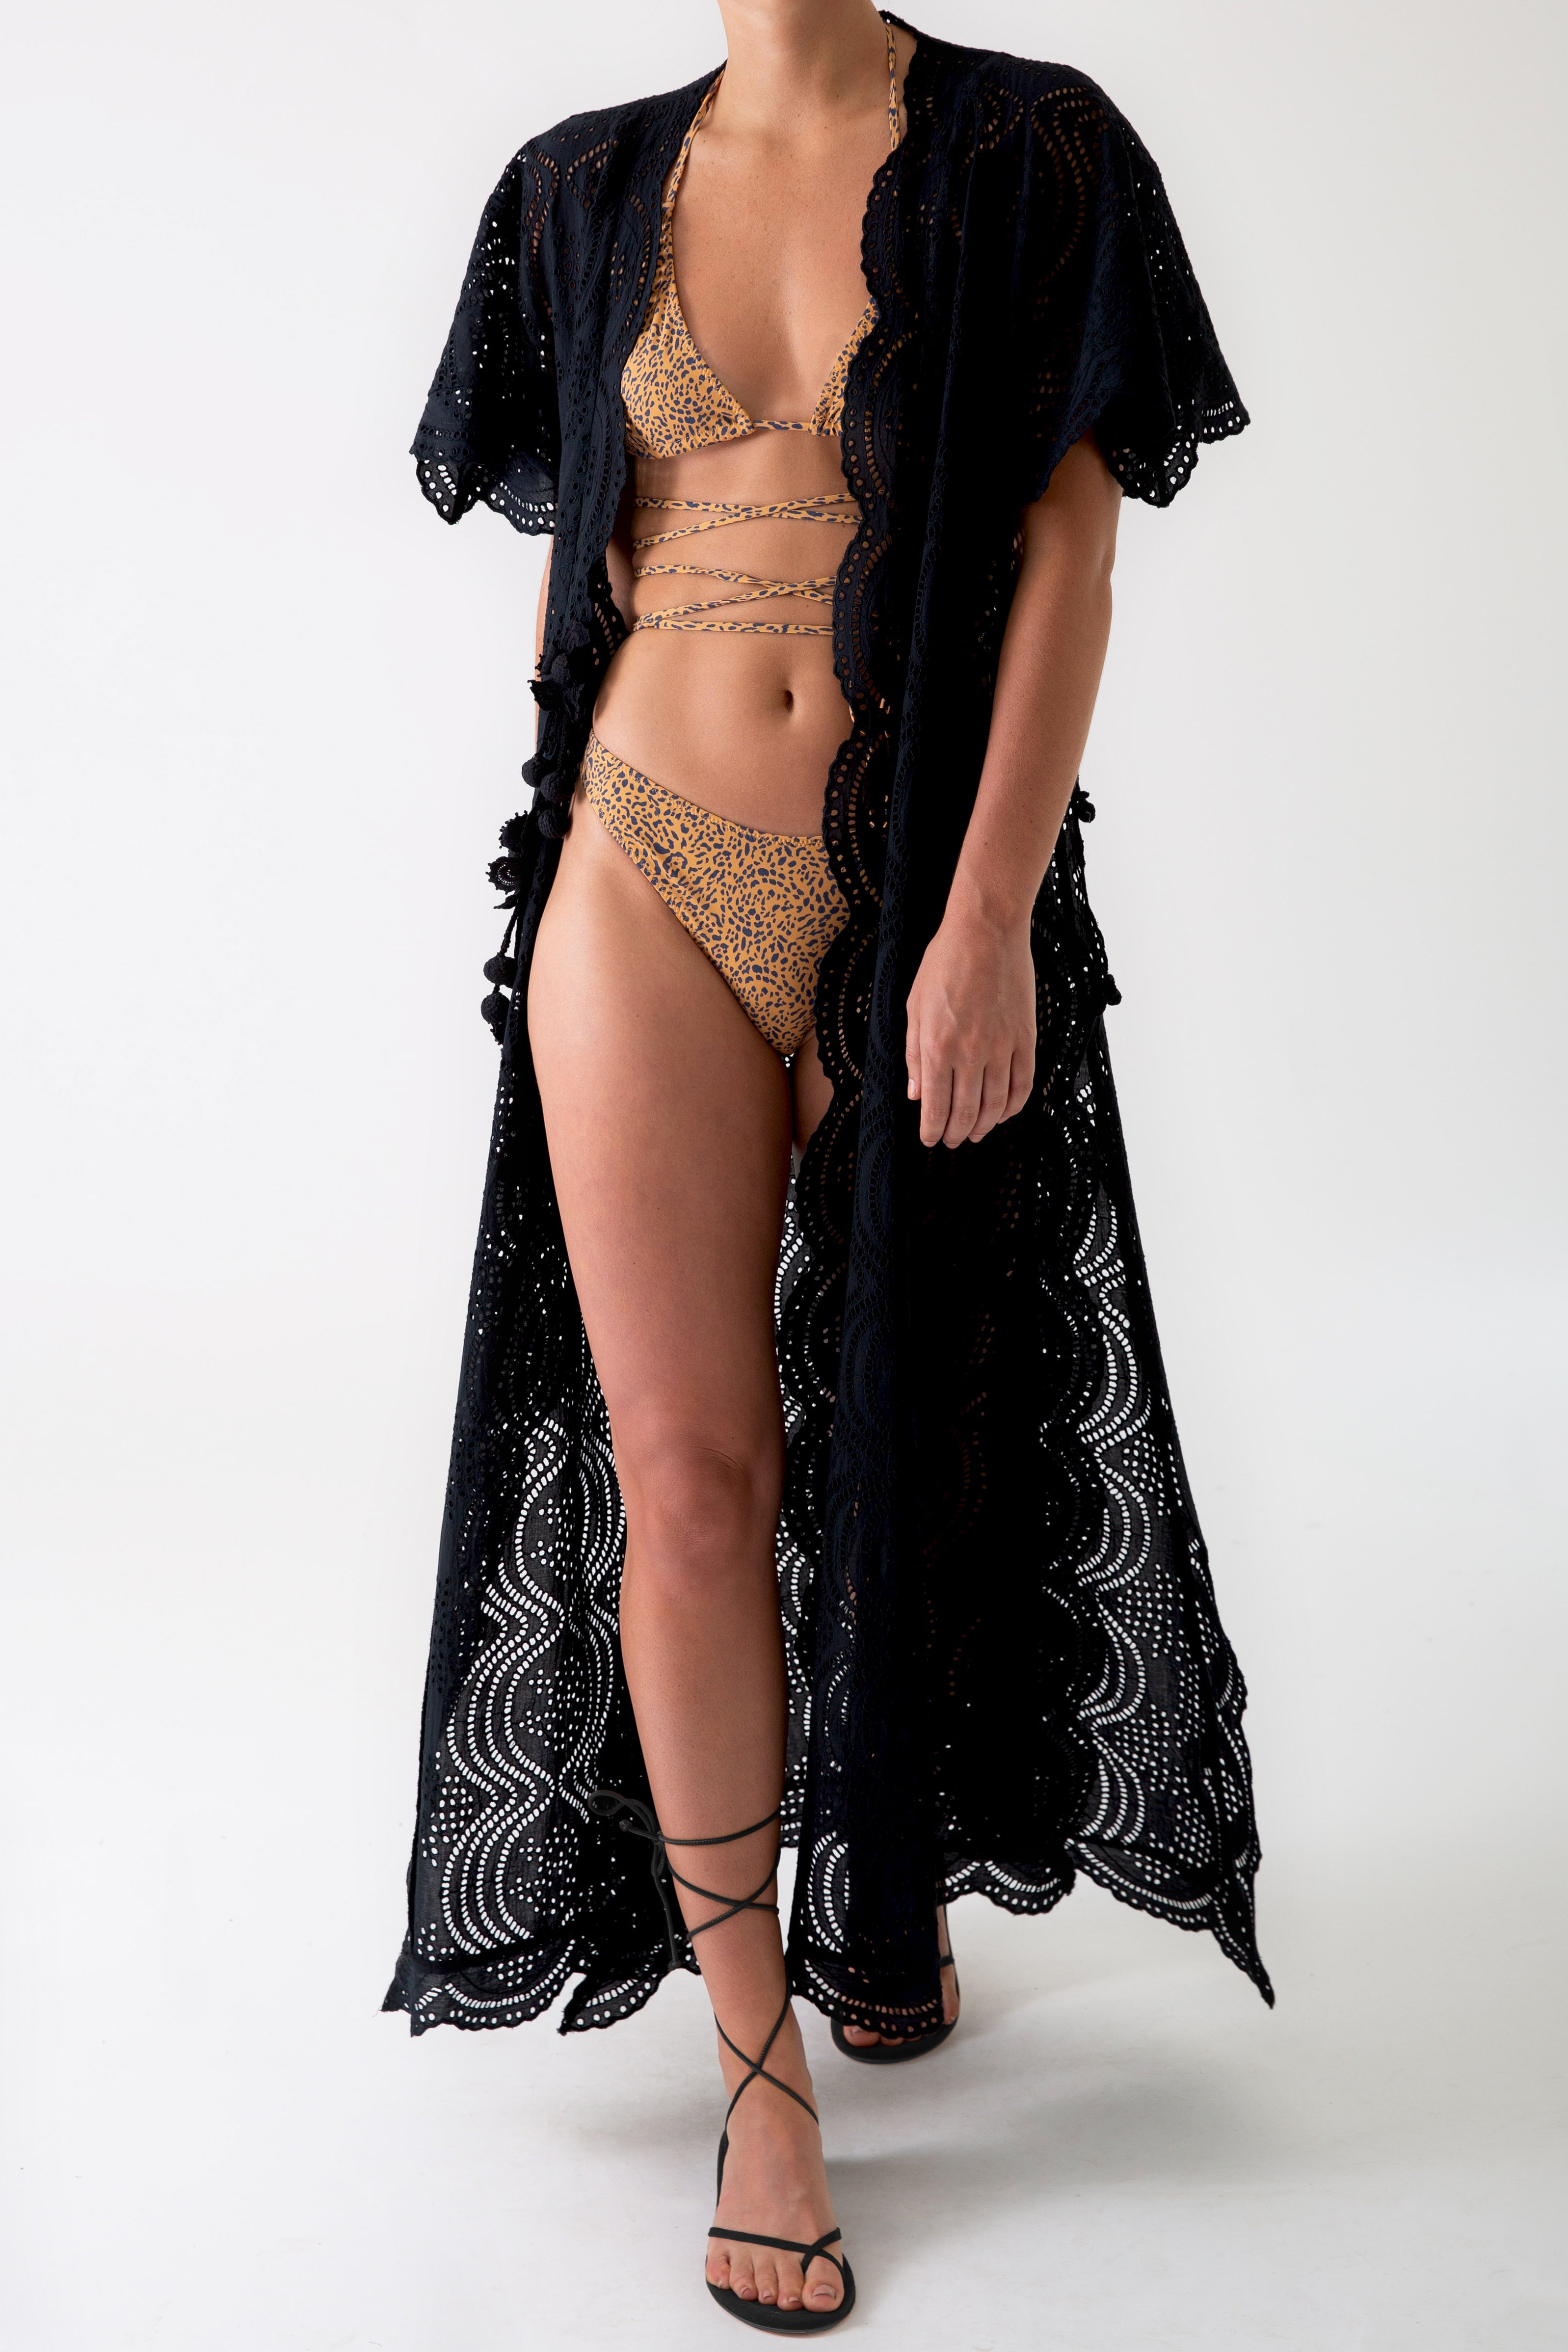 Imani Scalloped Lace Coverup Coat by Miguelina